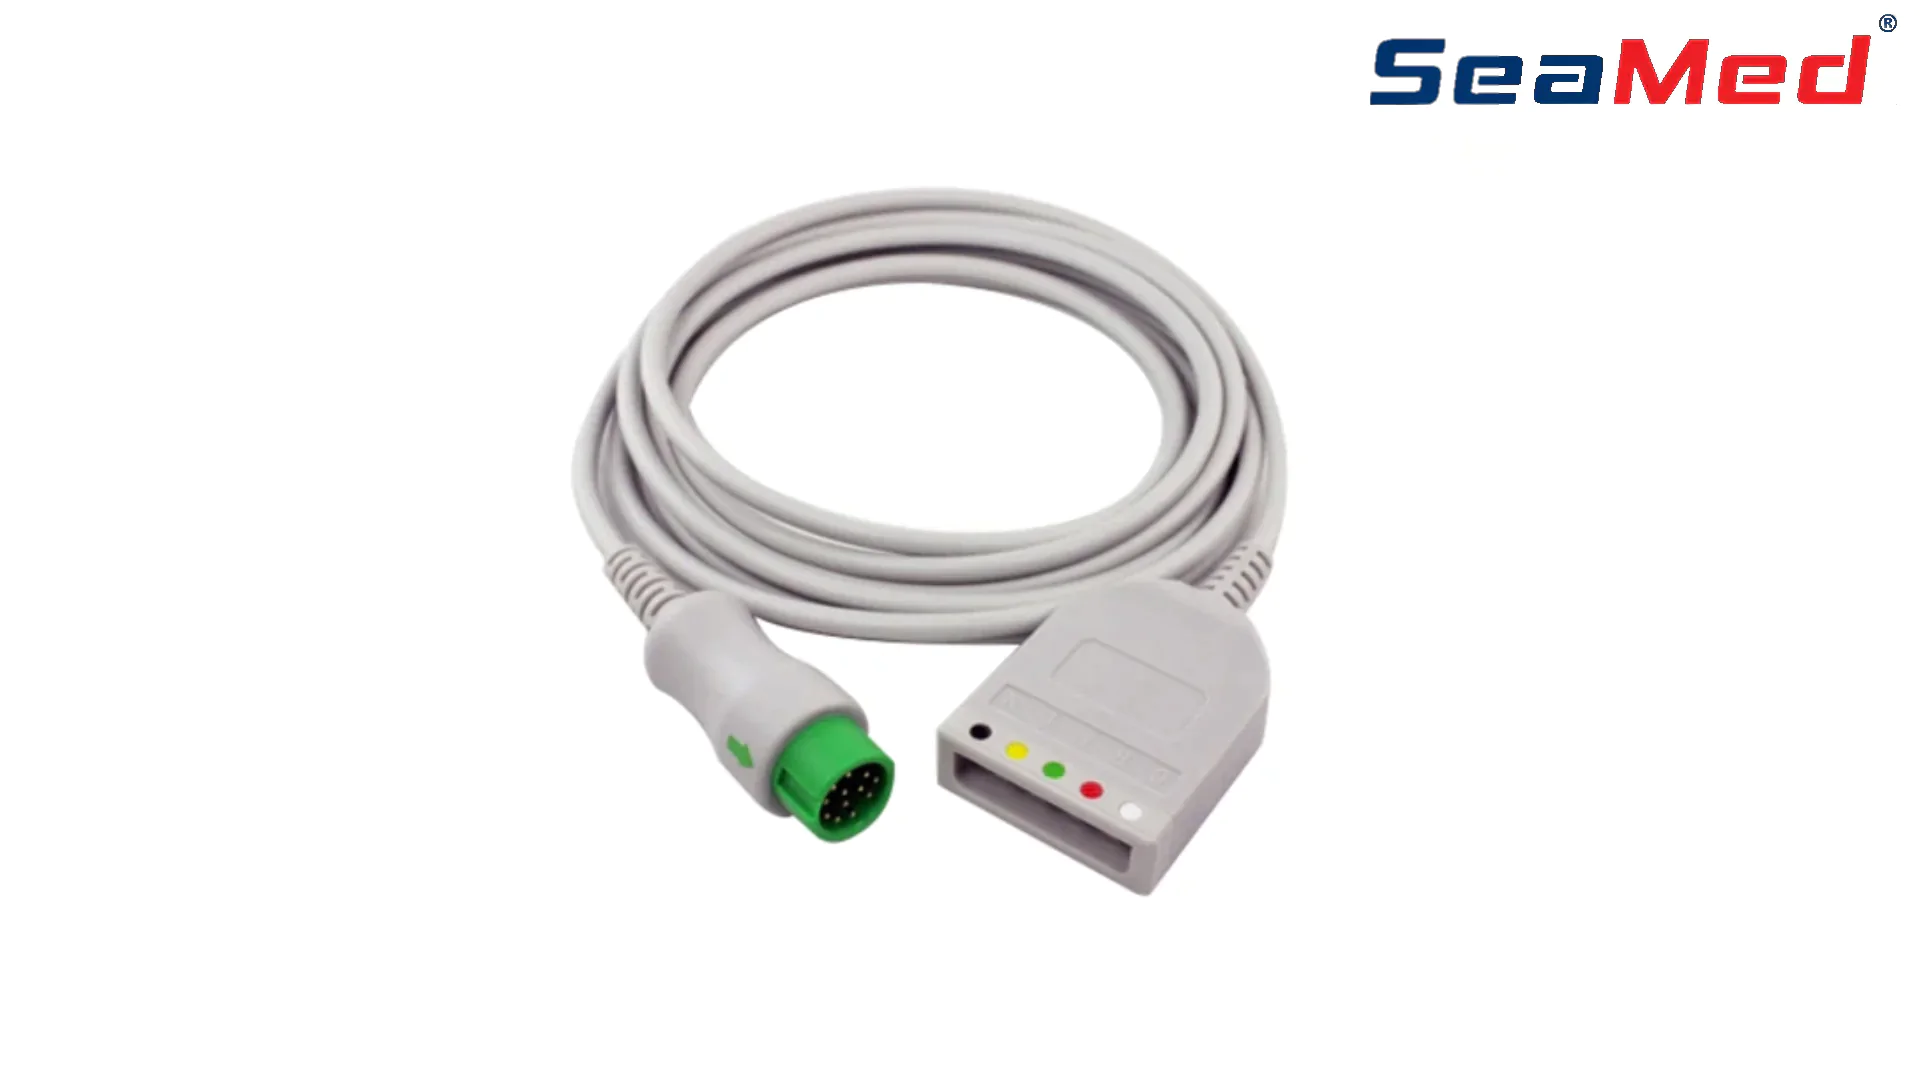 HWATI COMPATIBLE 5 LEAD ECG TRUNK CABLE